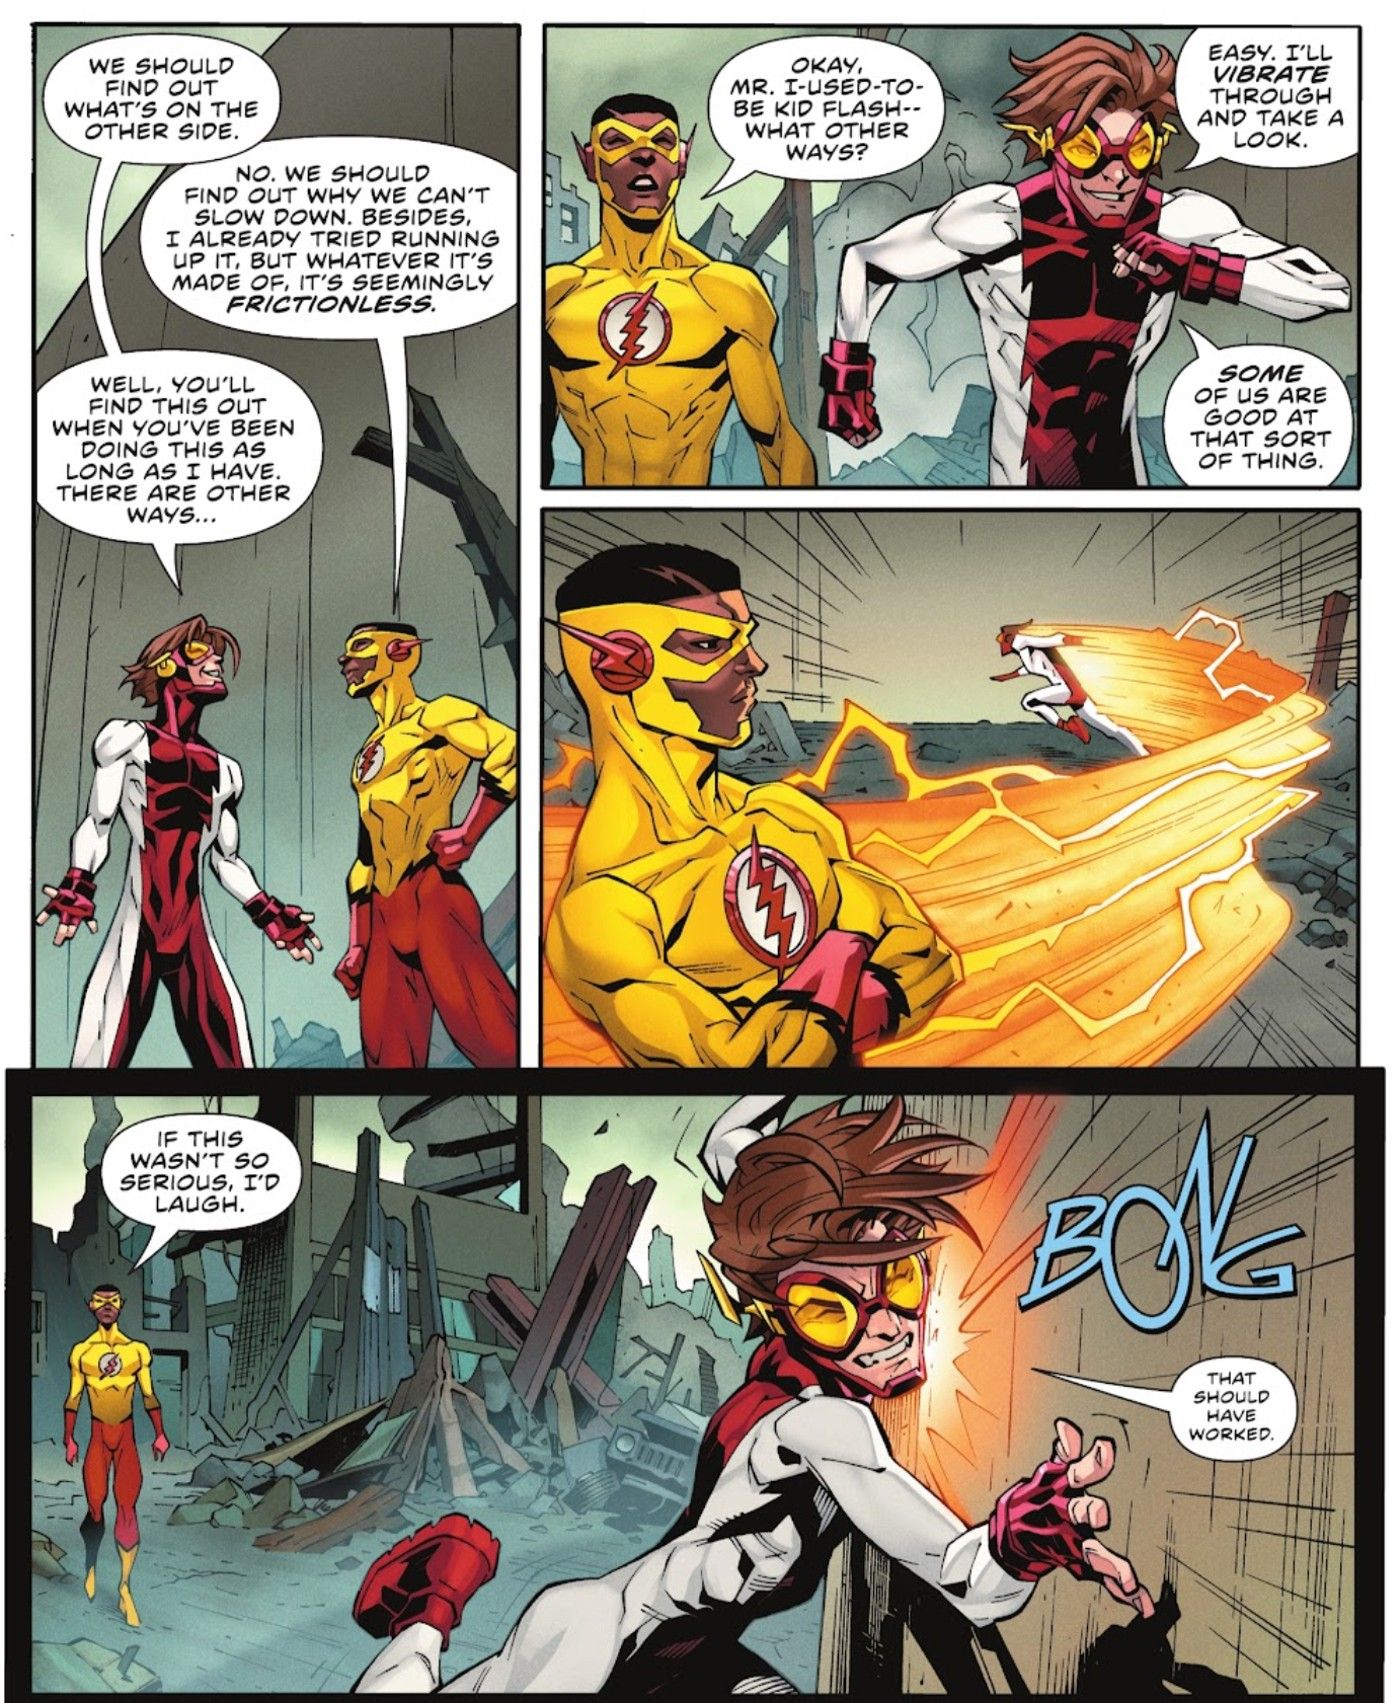 Kid Flash and Impulse Try to Get Past the Fraction's Wall